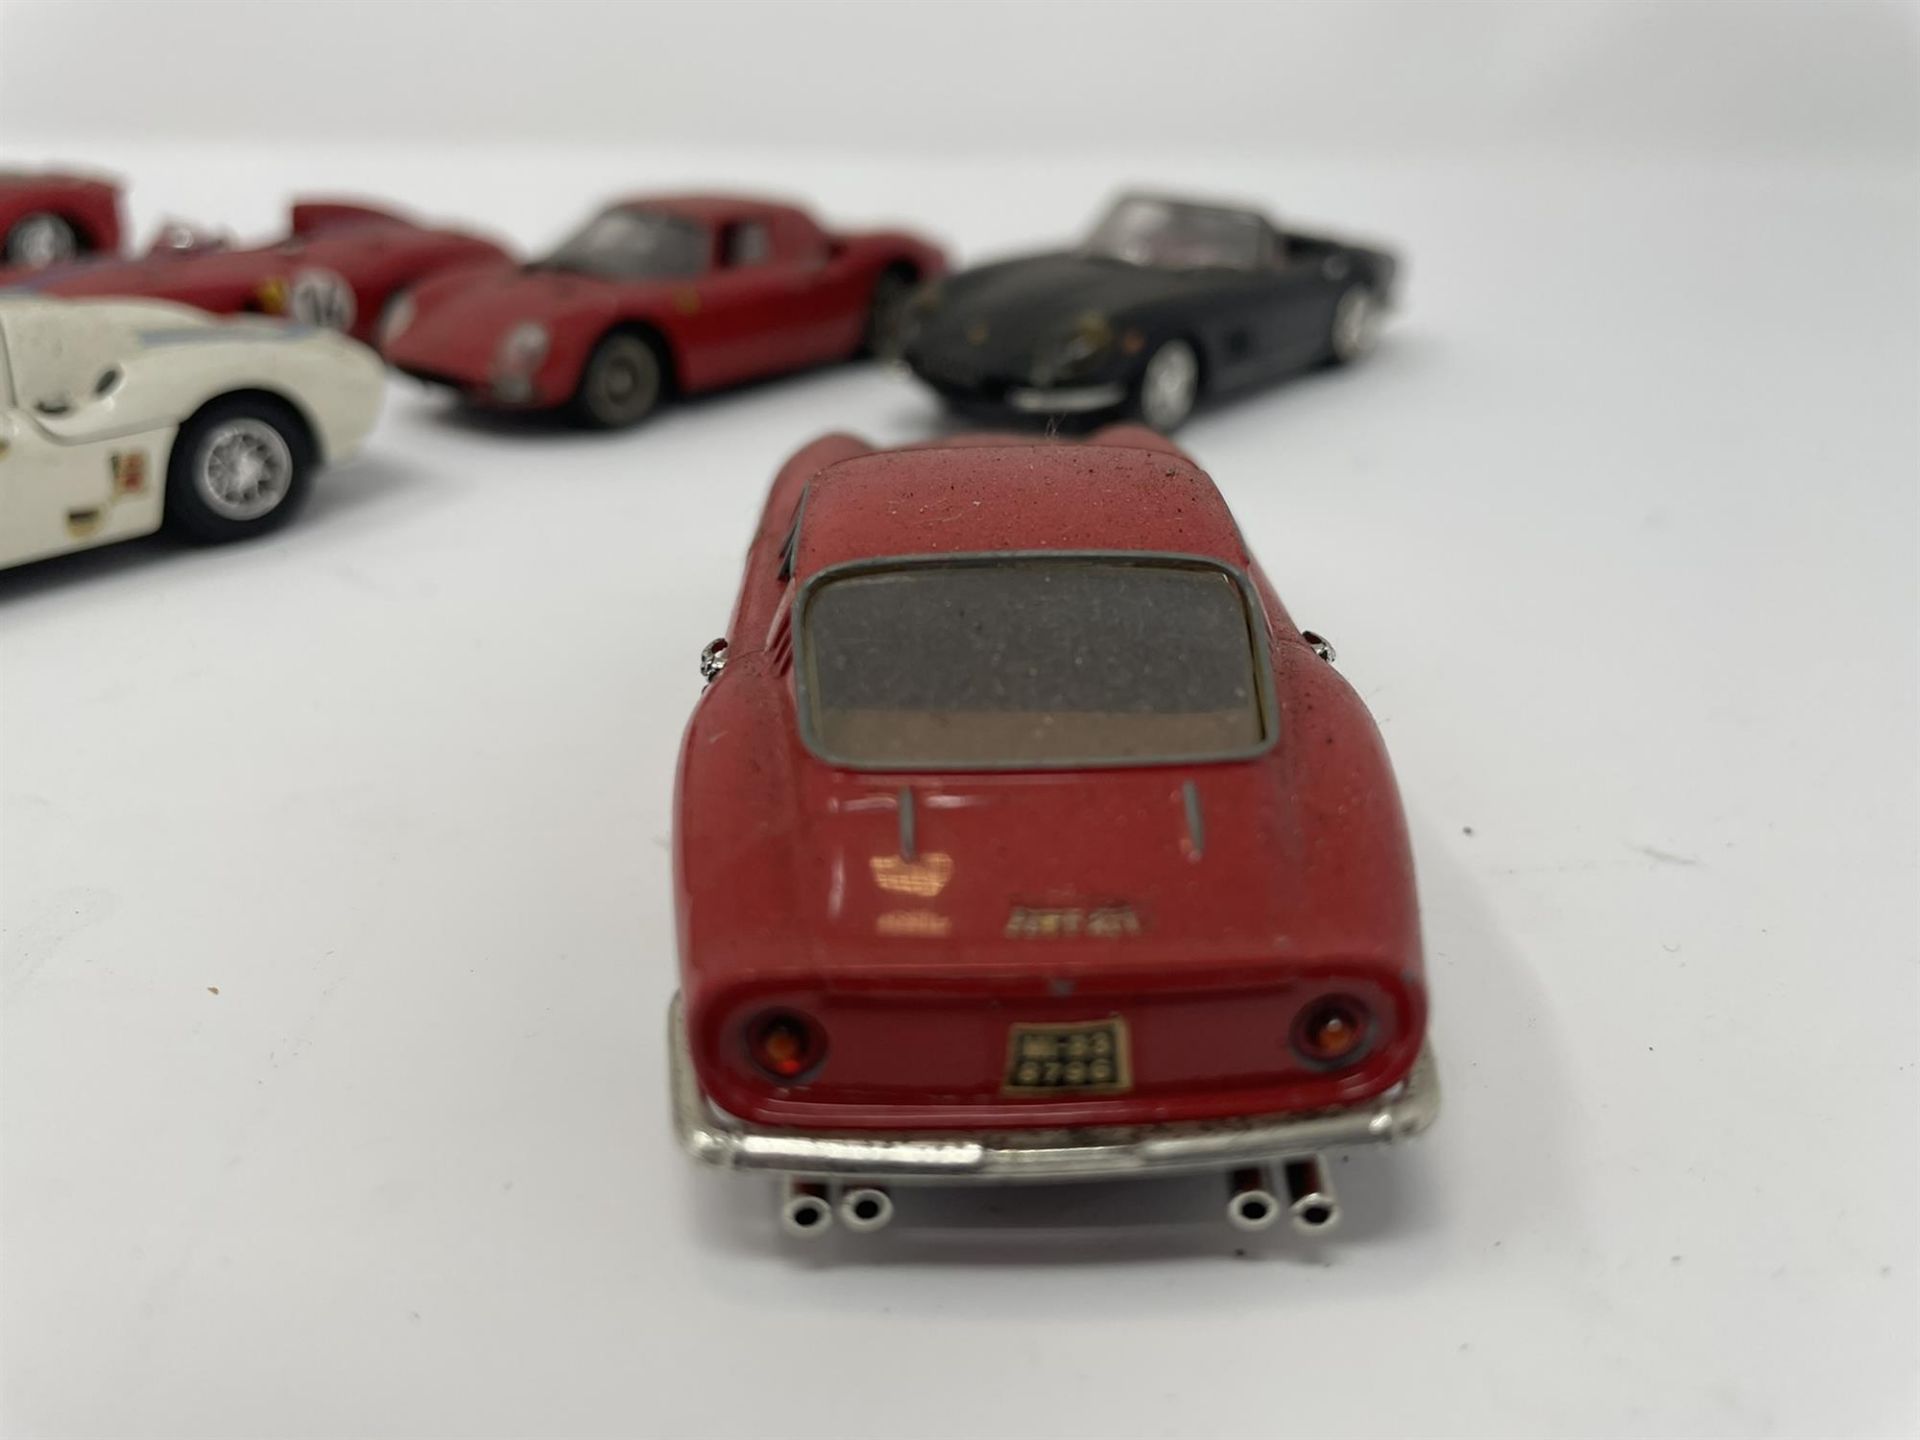 Ten 1/43rd Scale Ferrari Models from the 1950s, 60s and 70s - Image 6 of 10